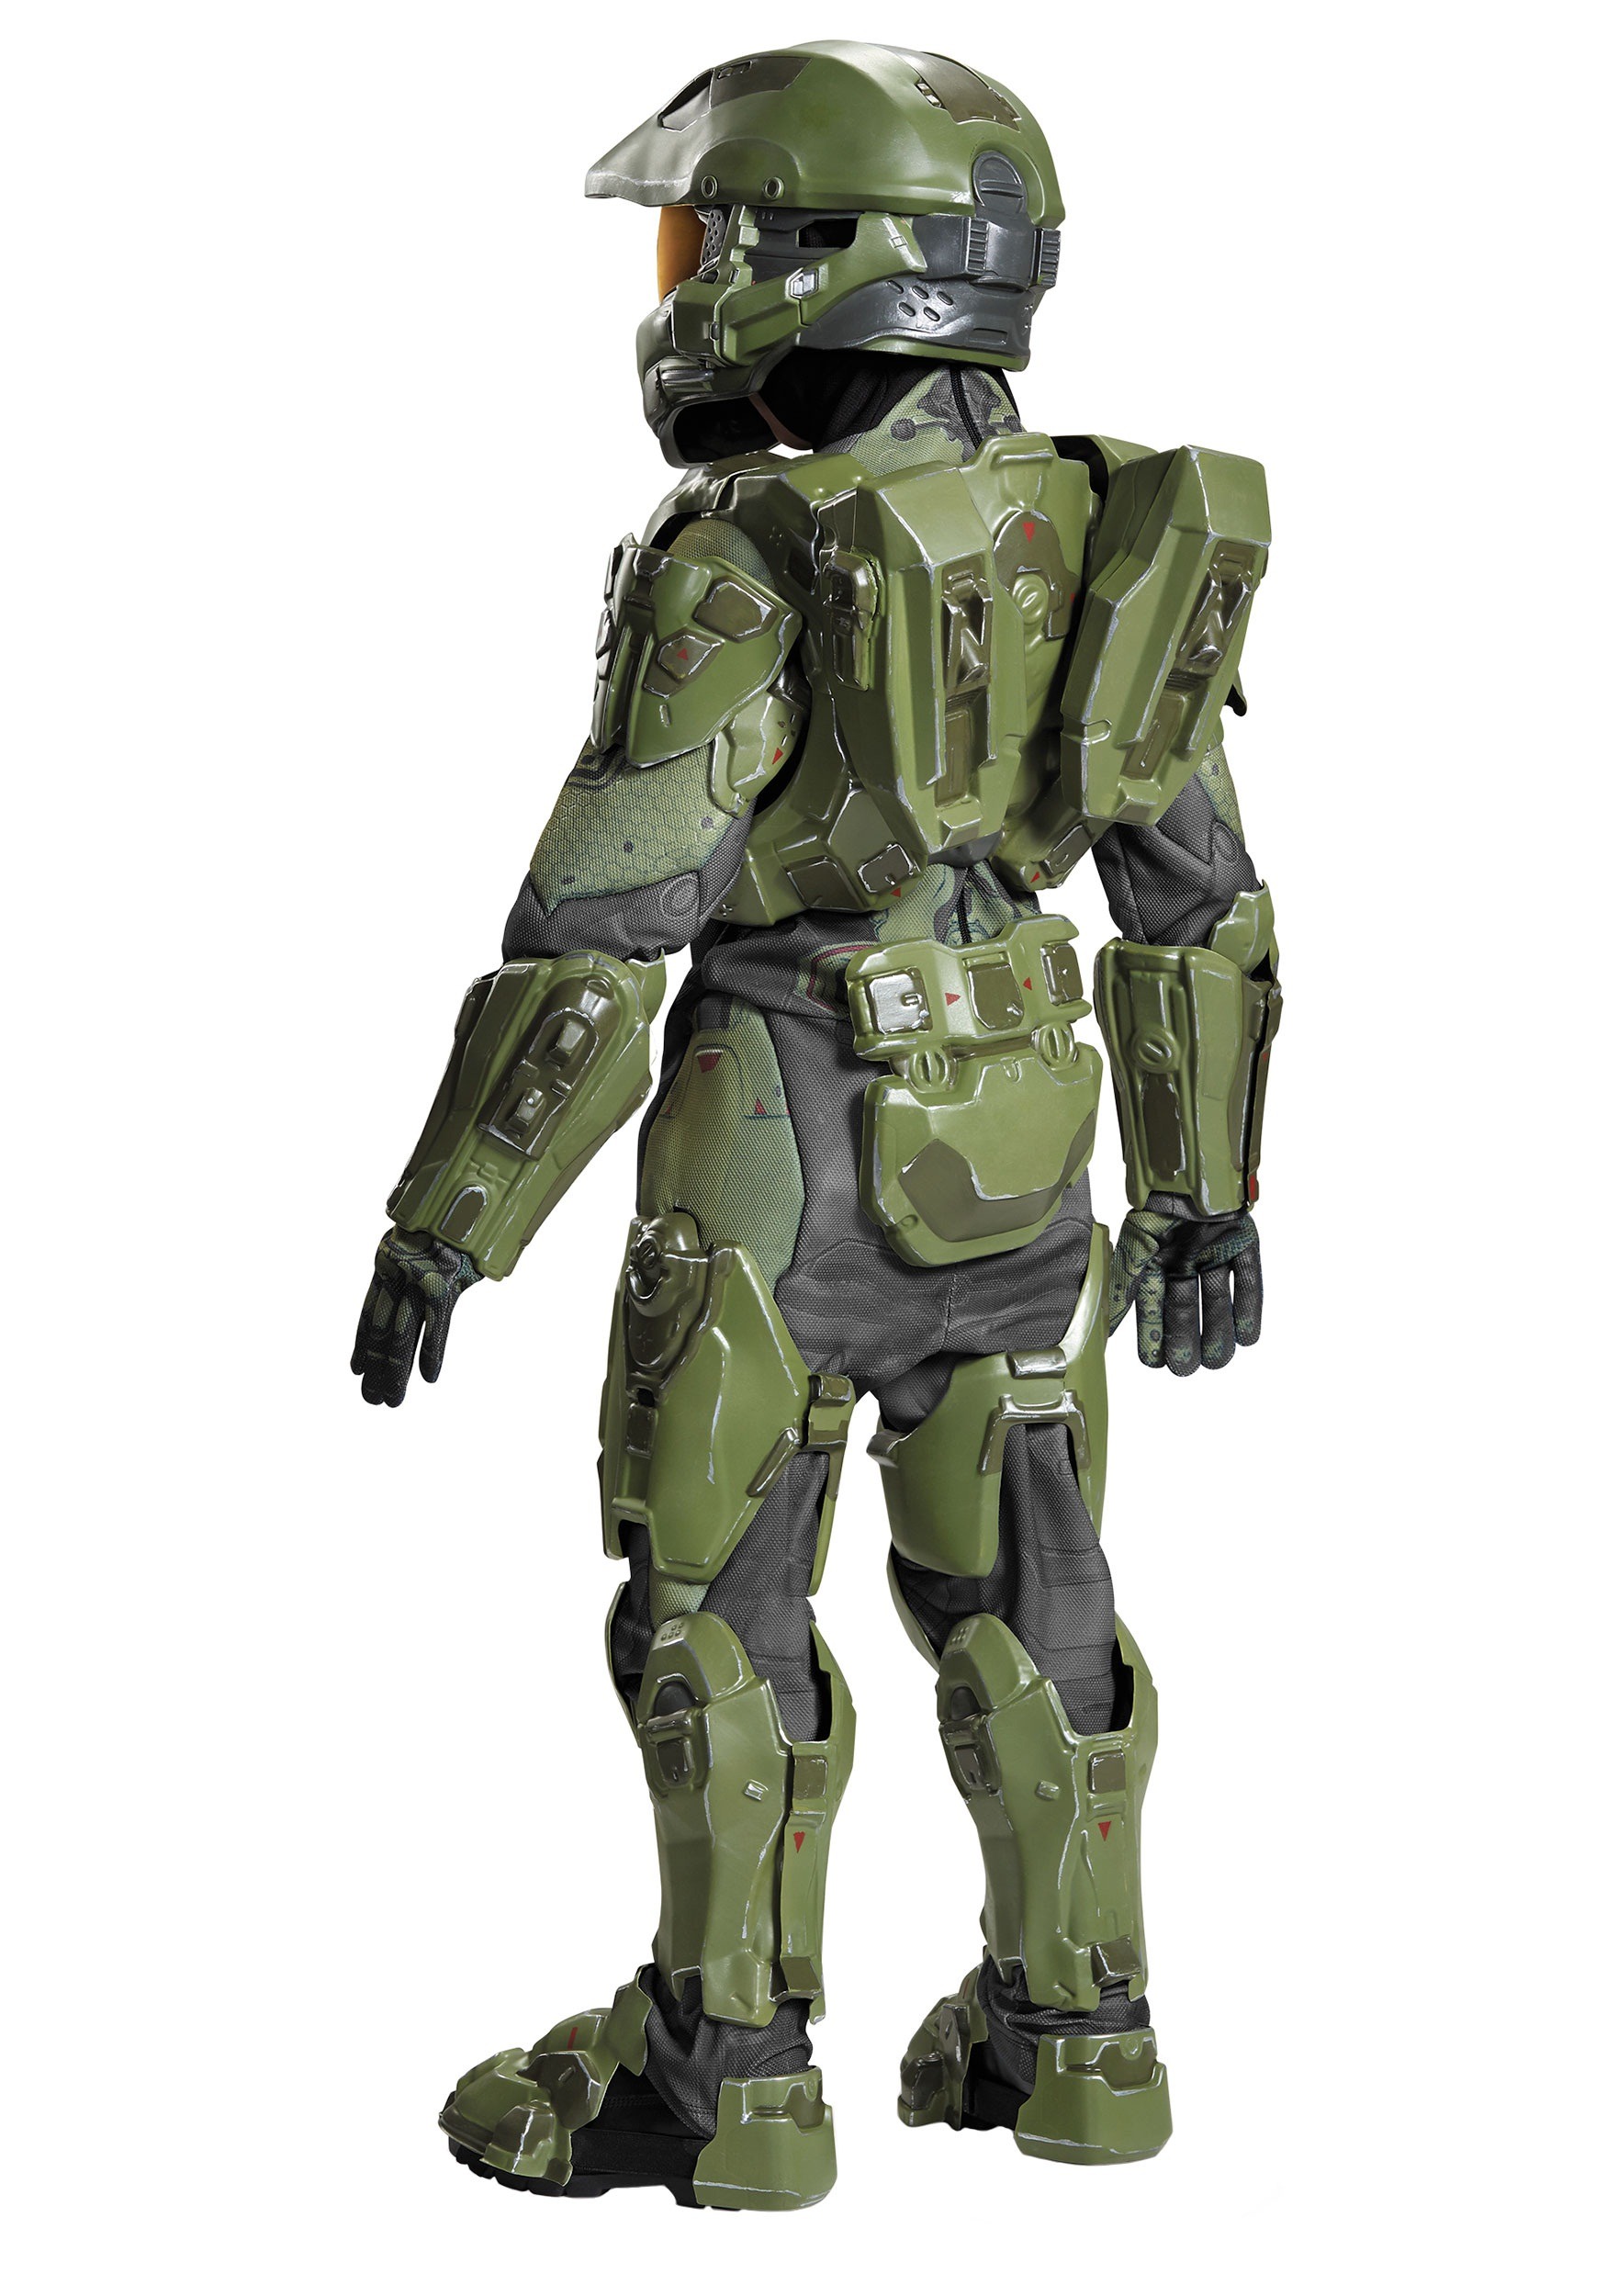 Halo 4 Master Chief Costume For Kids